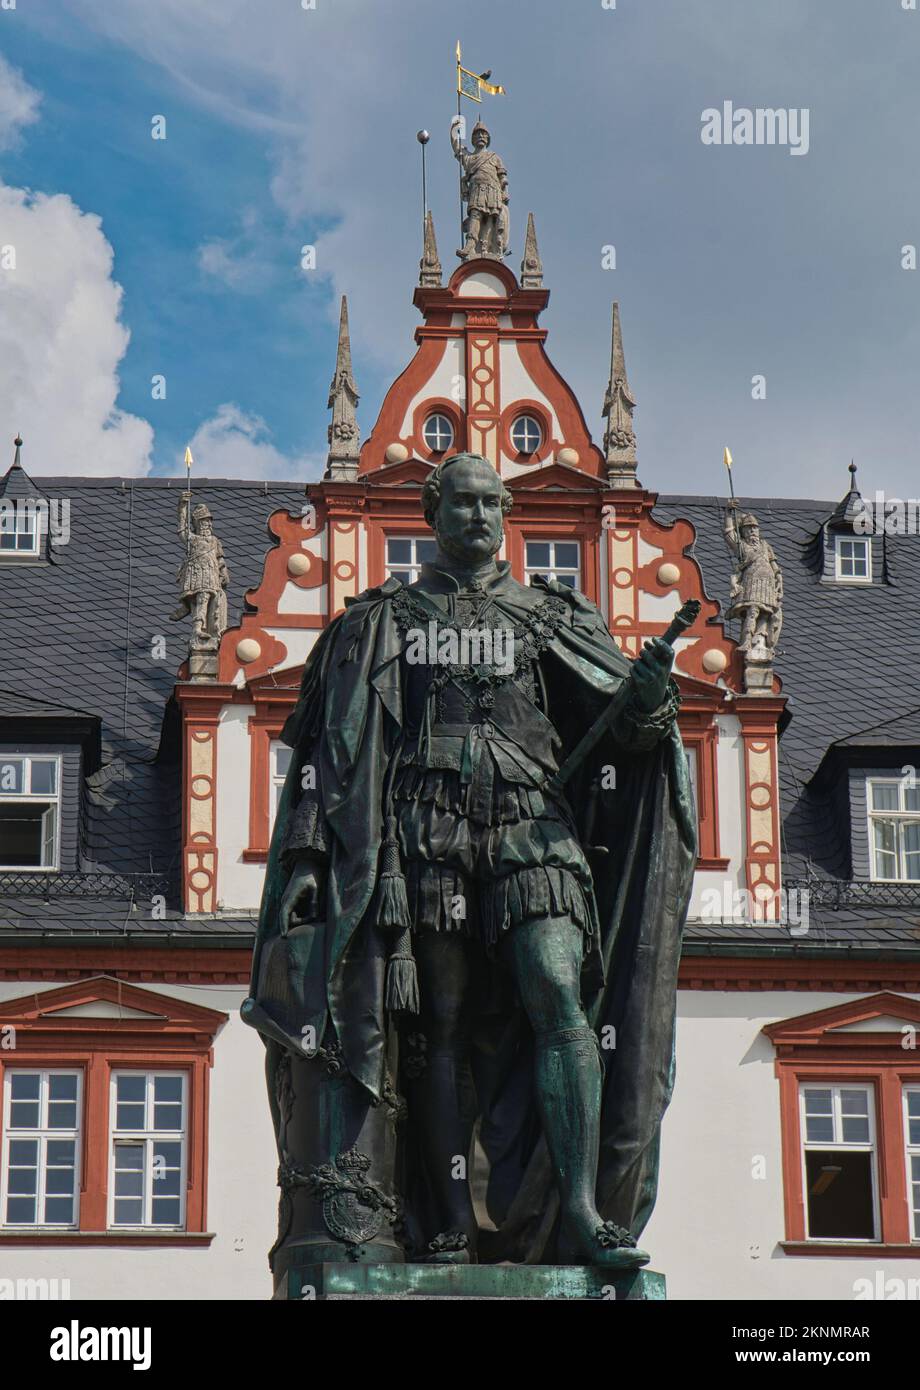 Statue of Prince Albert in the Town Square of Coburg, Bavaria, Germany Stock Photo